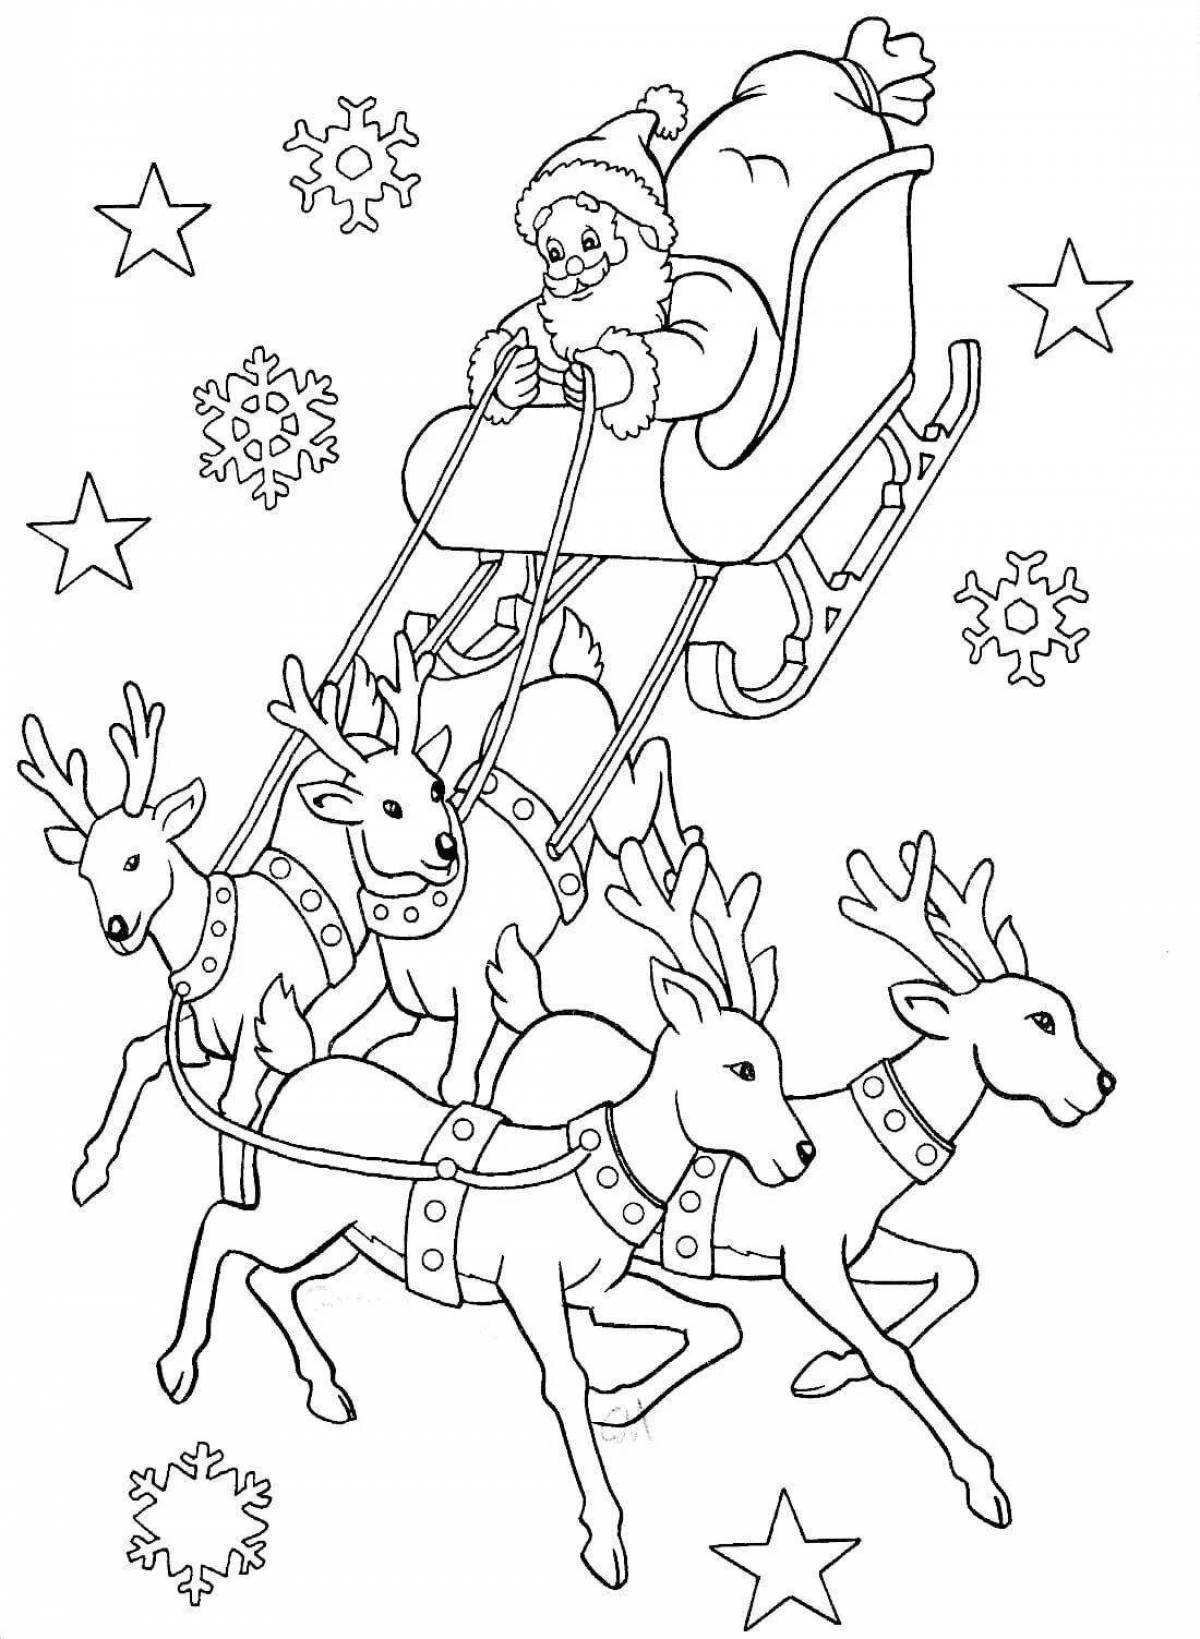 Coloring page stylish Santa Claus on a sleigh